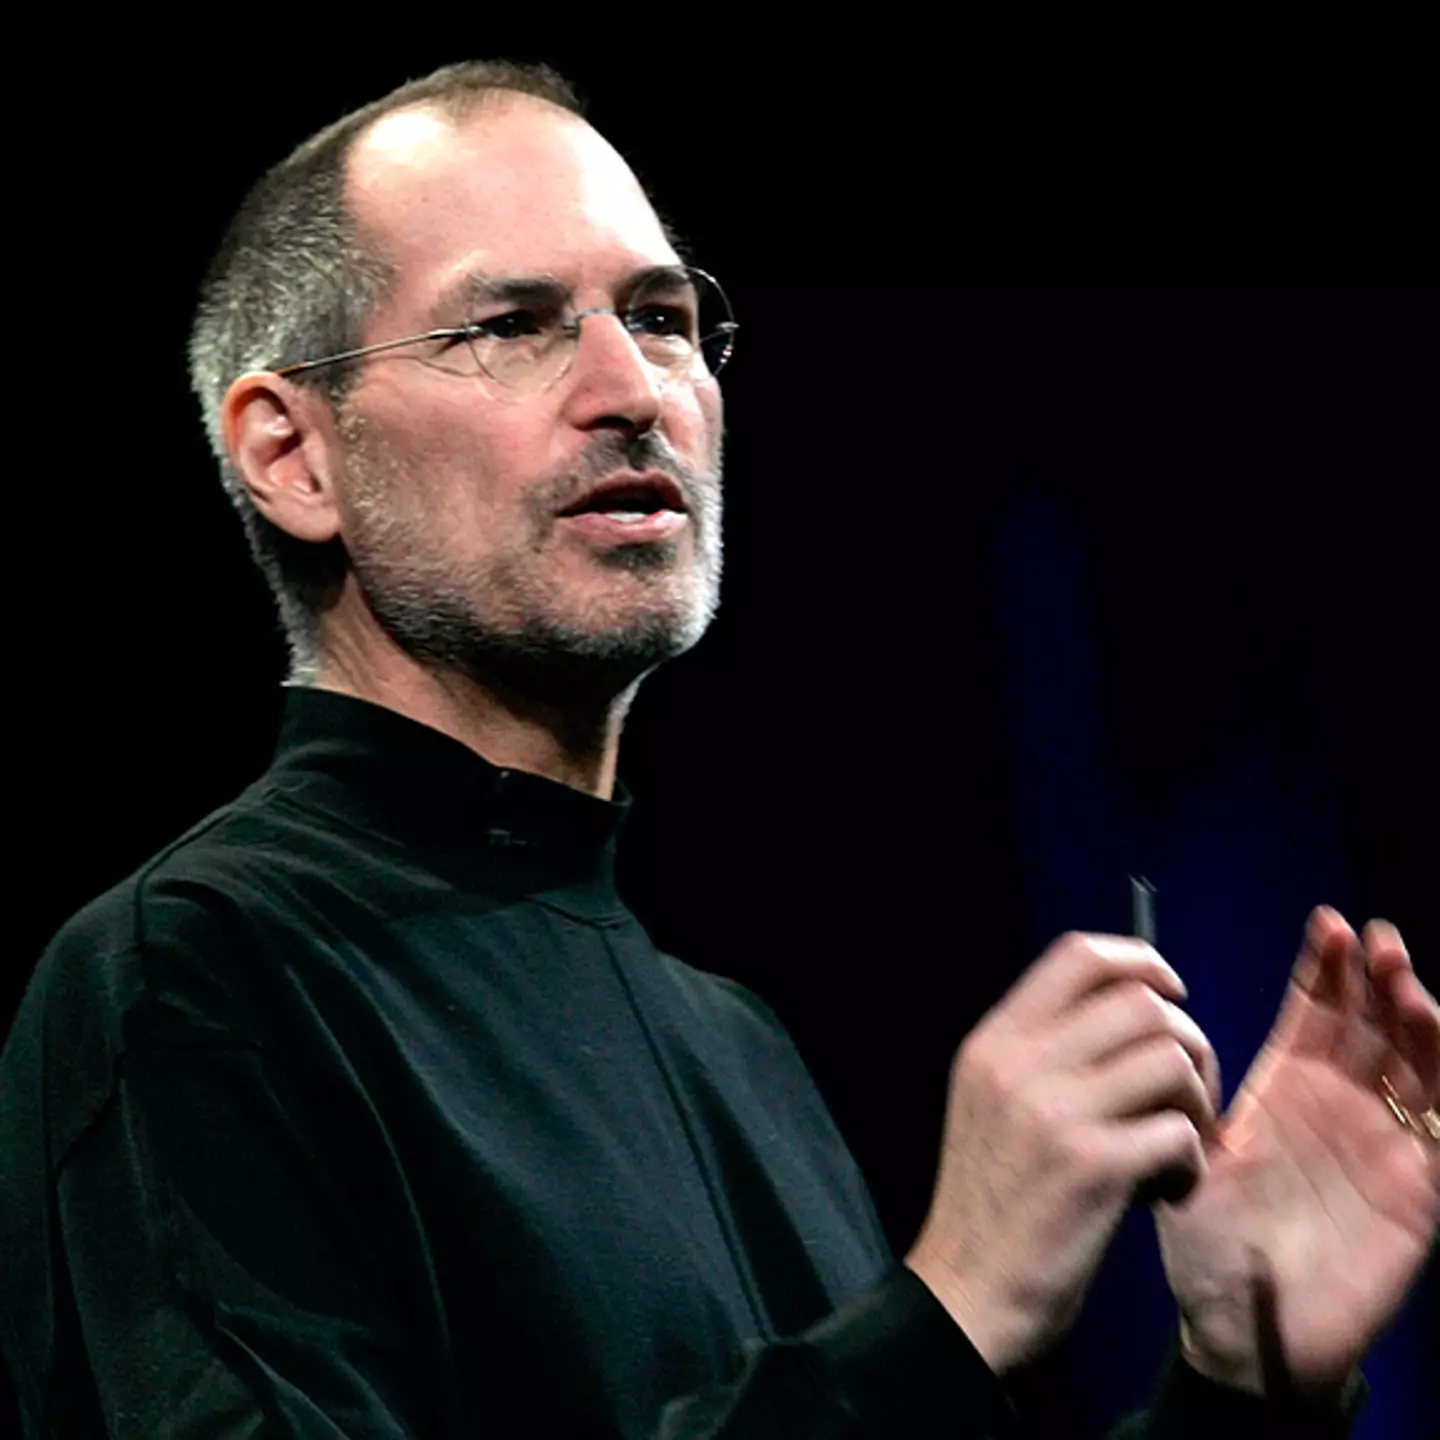 The bizarre reason Steve Jobs called his company Apple and the story behind it